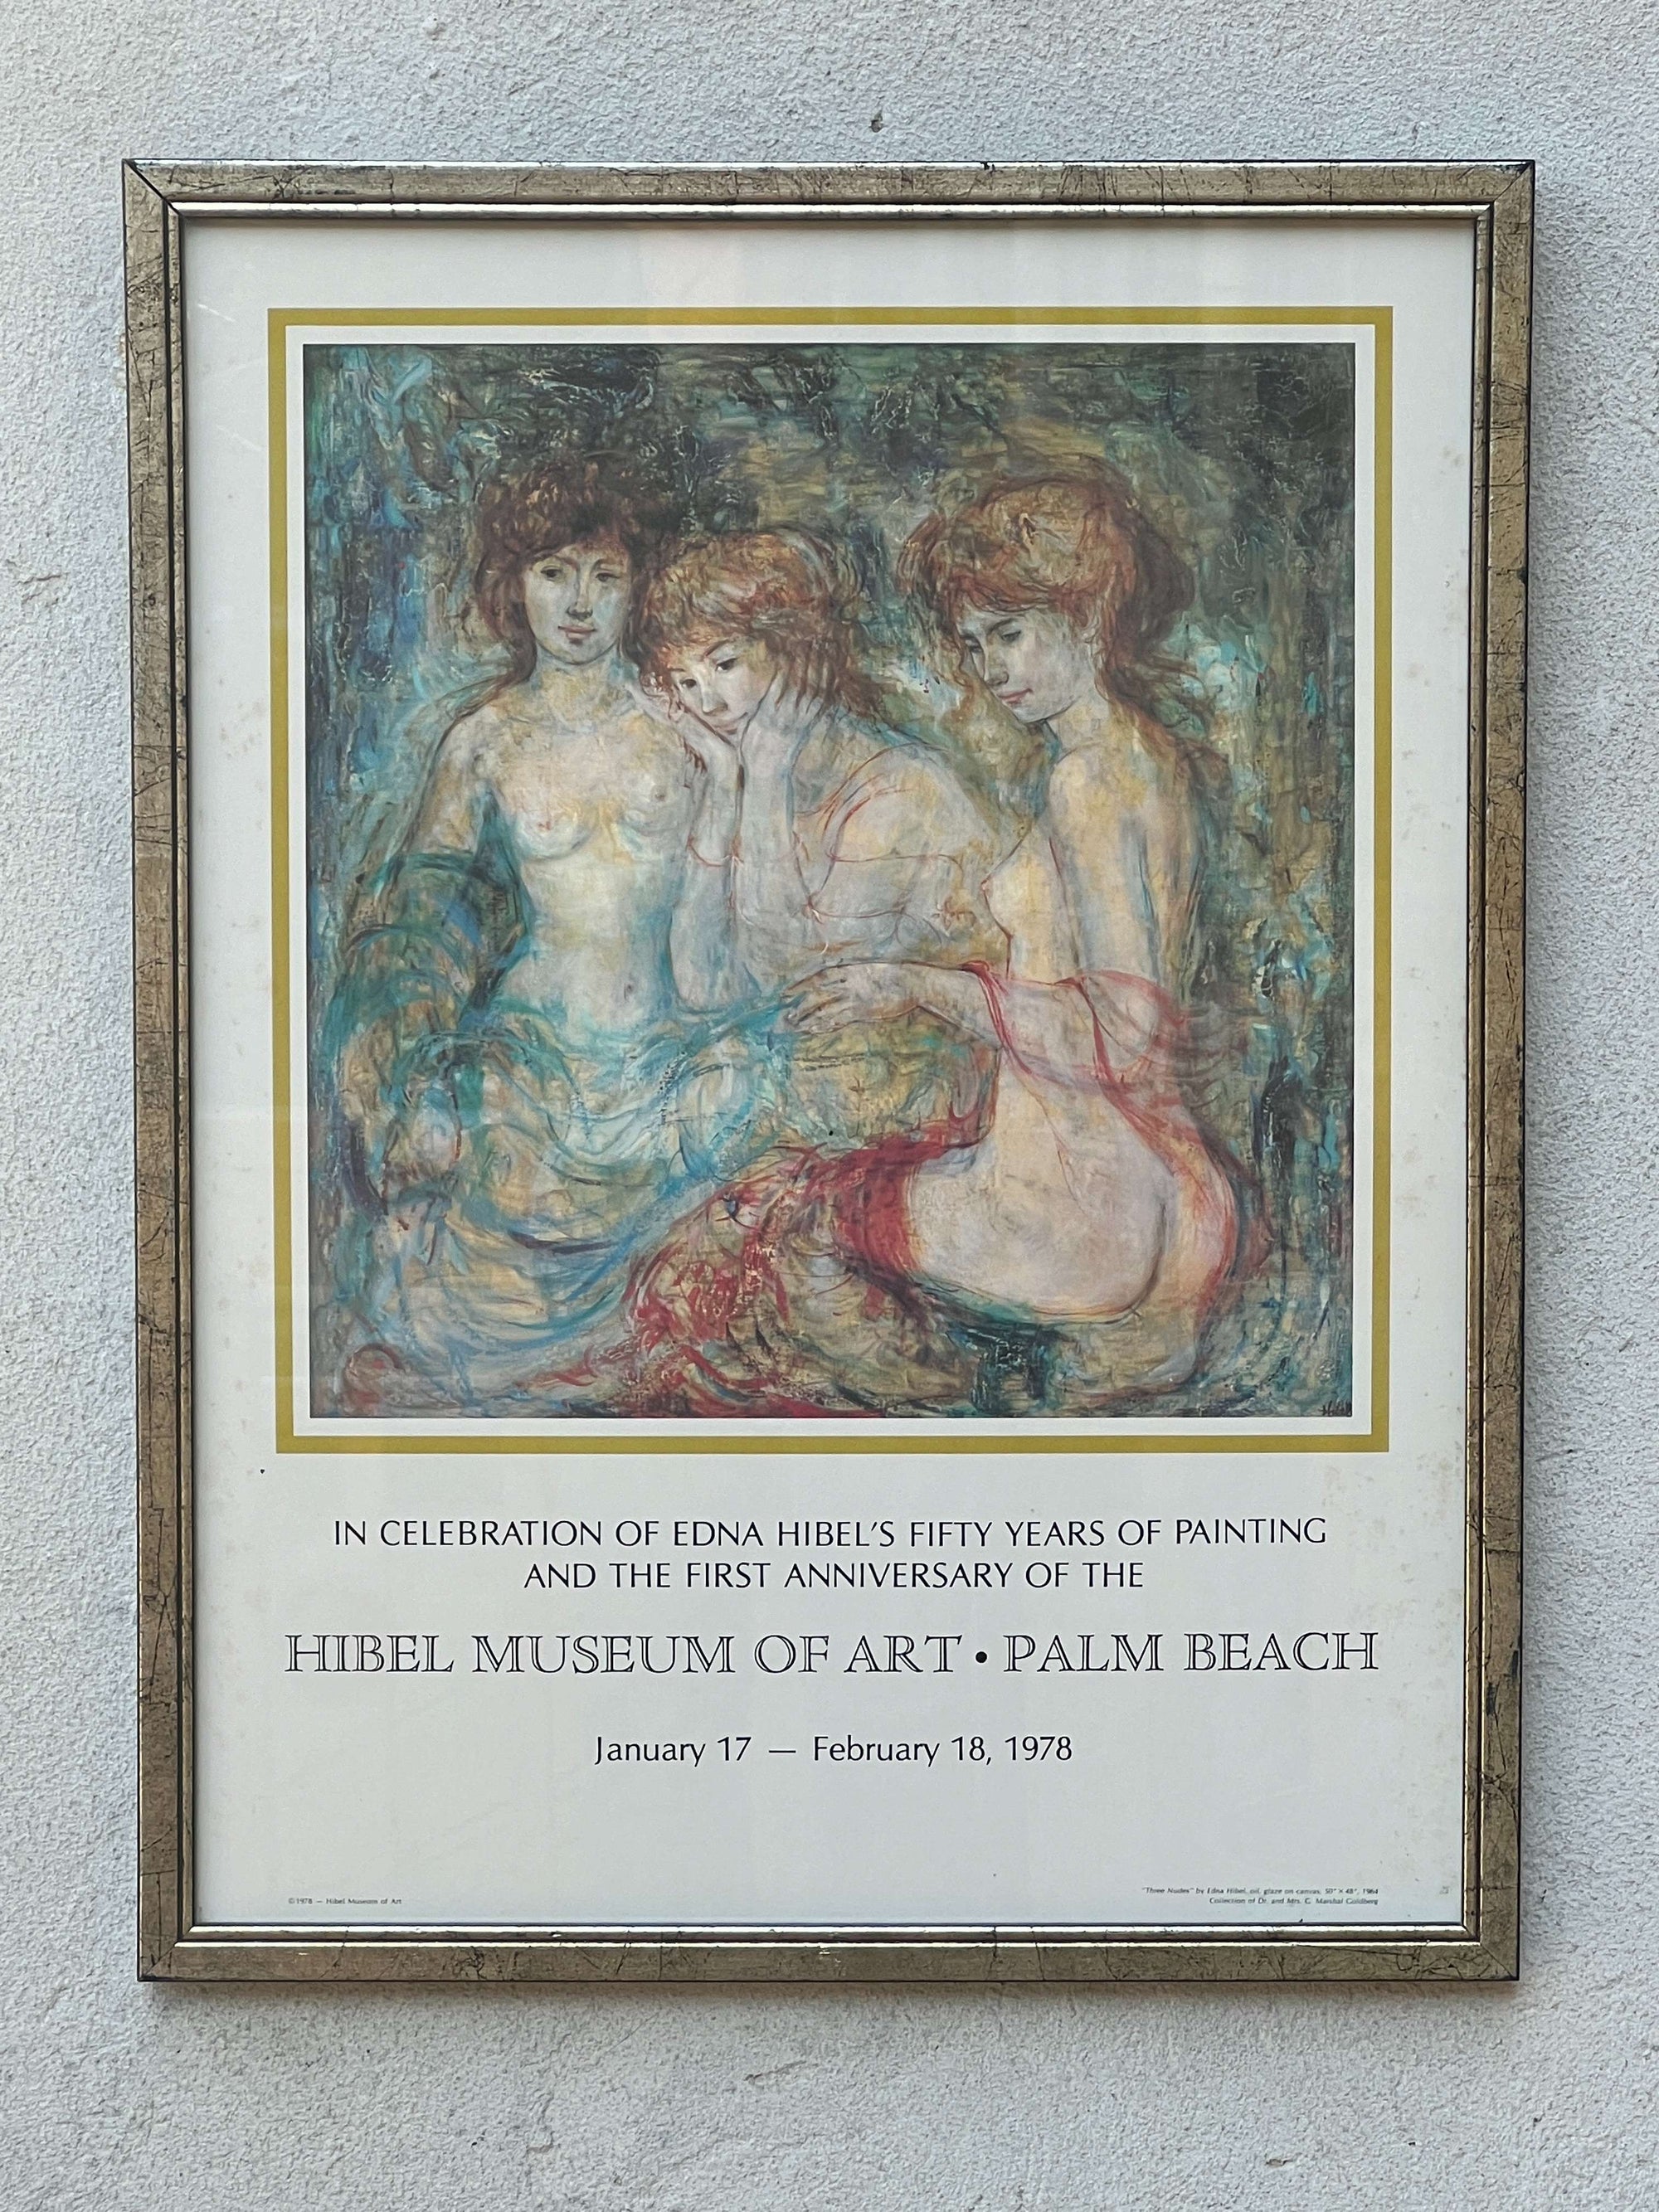 Three Nudes, Celebration of Edna Hibel's Fifty Years of Painting,1978, Hibel Museum of Art, Palm Beach